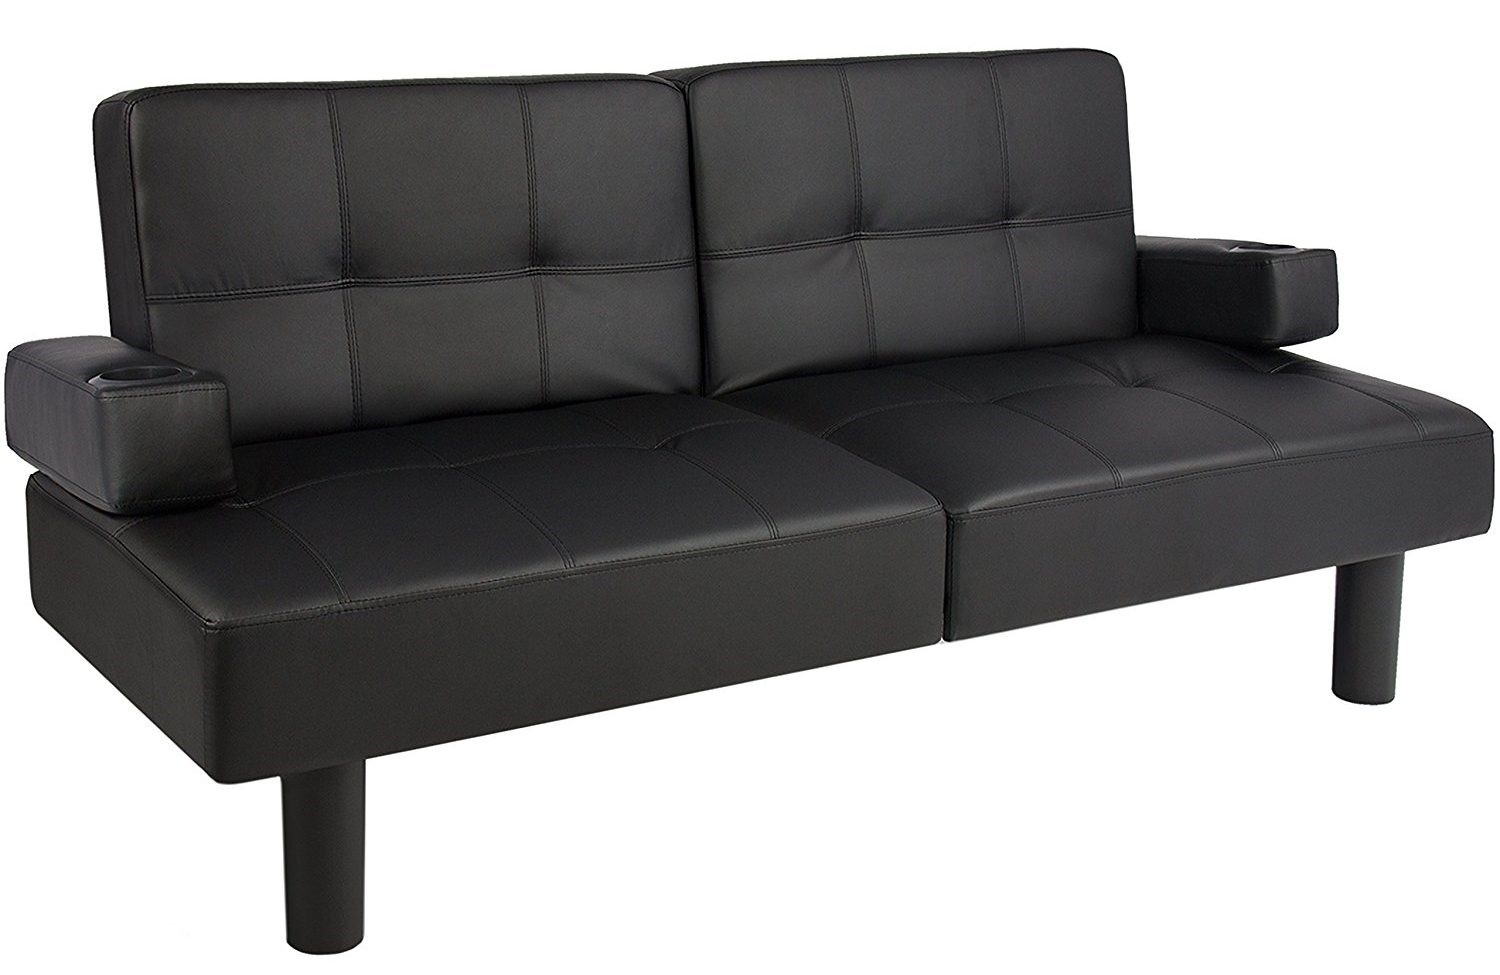 Convertible Futon Sofa Bed and Lounger